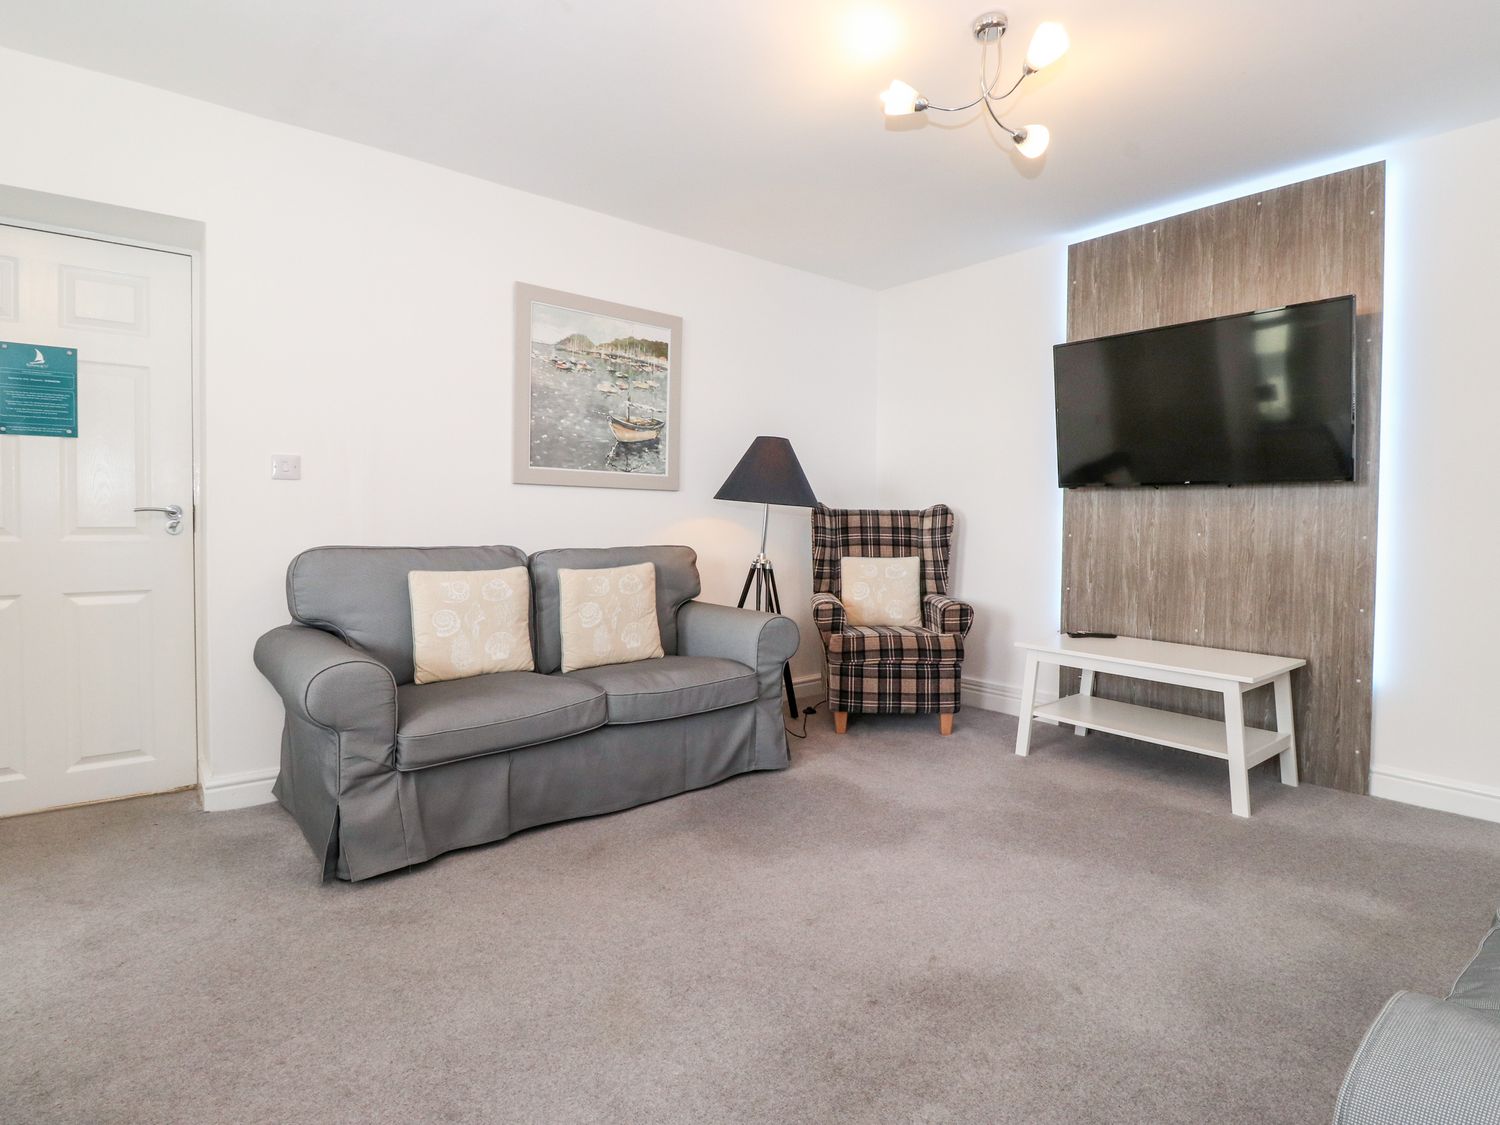 Apartment 2 @52 - North Yorkshire (incl. Whitby) - 1136975 - photo 1